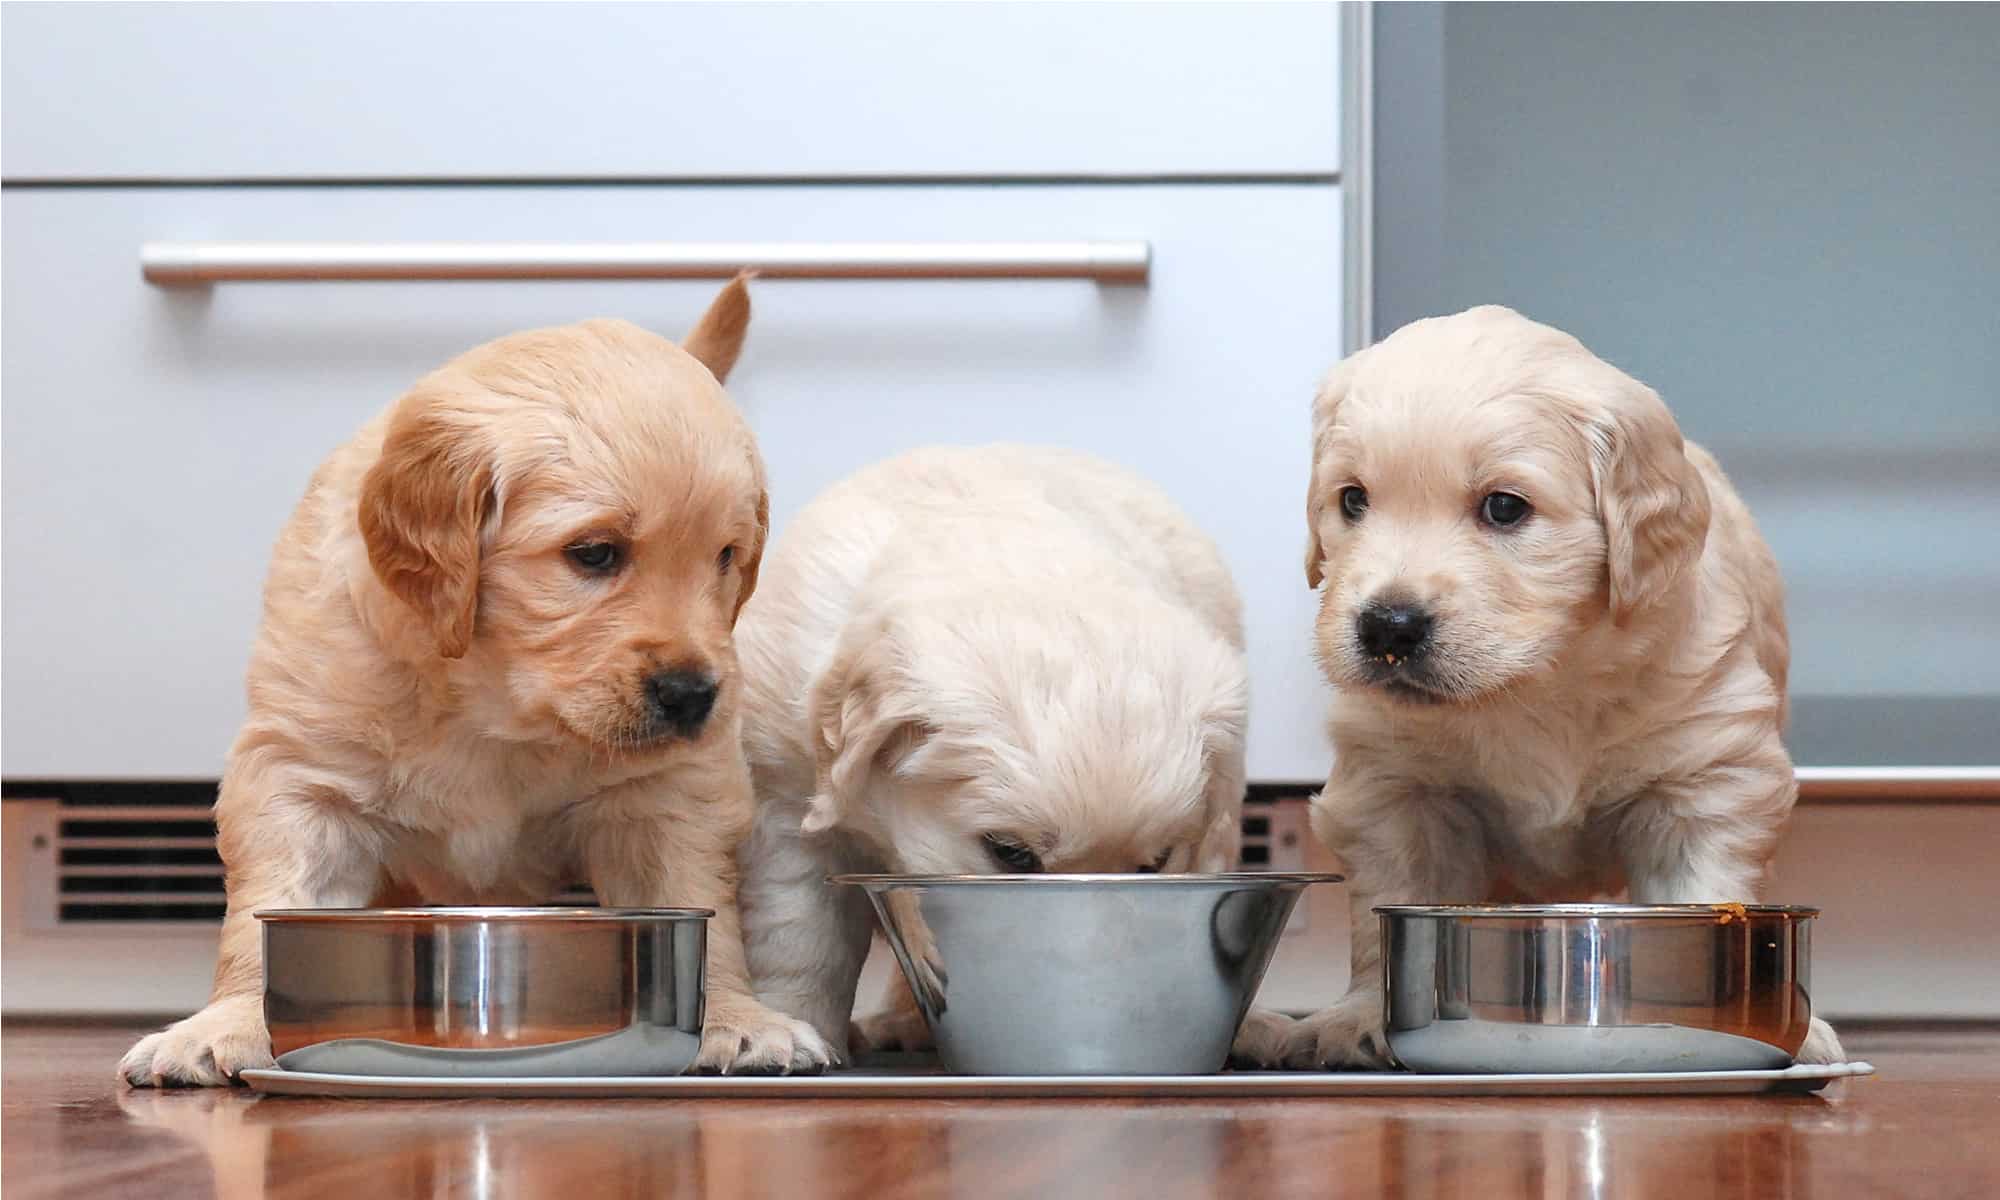 How long does it take a dog to digest food?